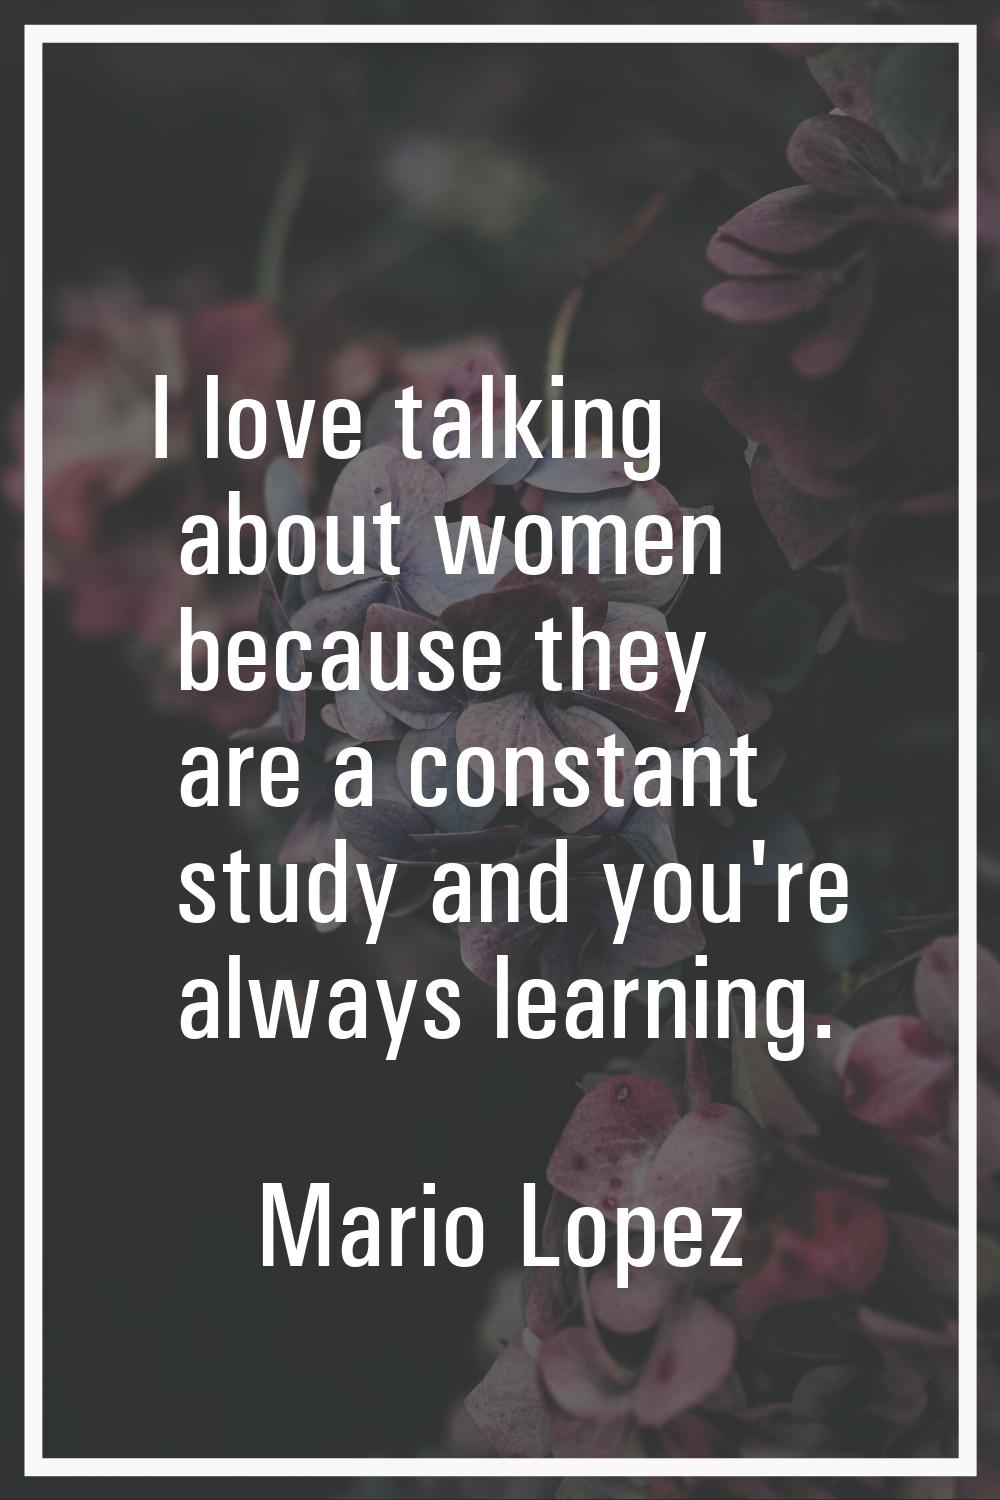 I love talking about women because they are a constant study and you're always learning.